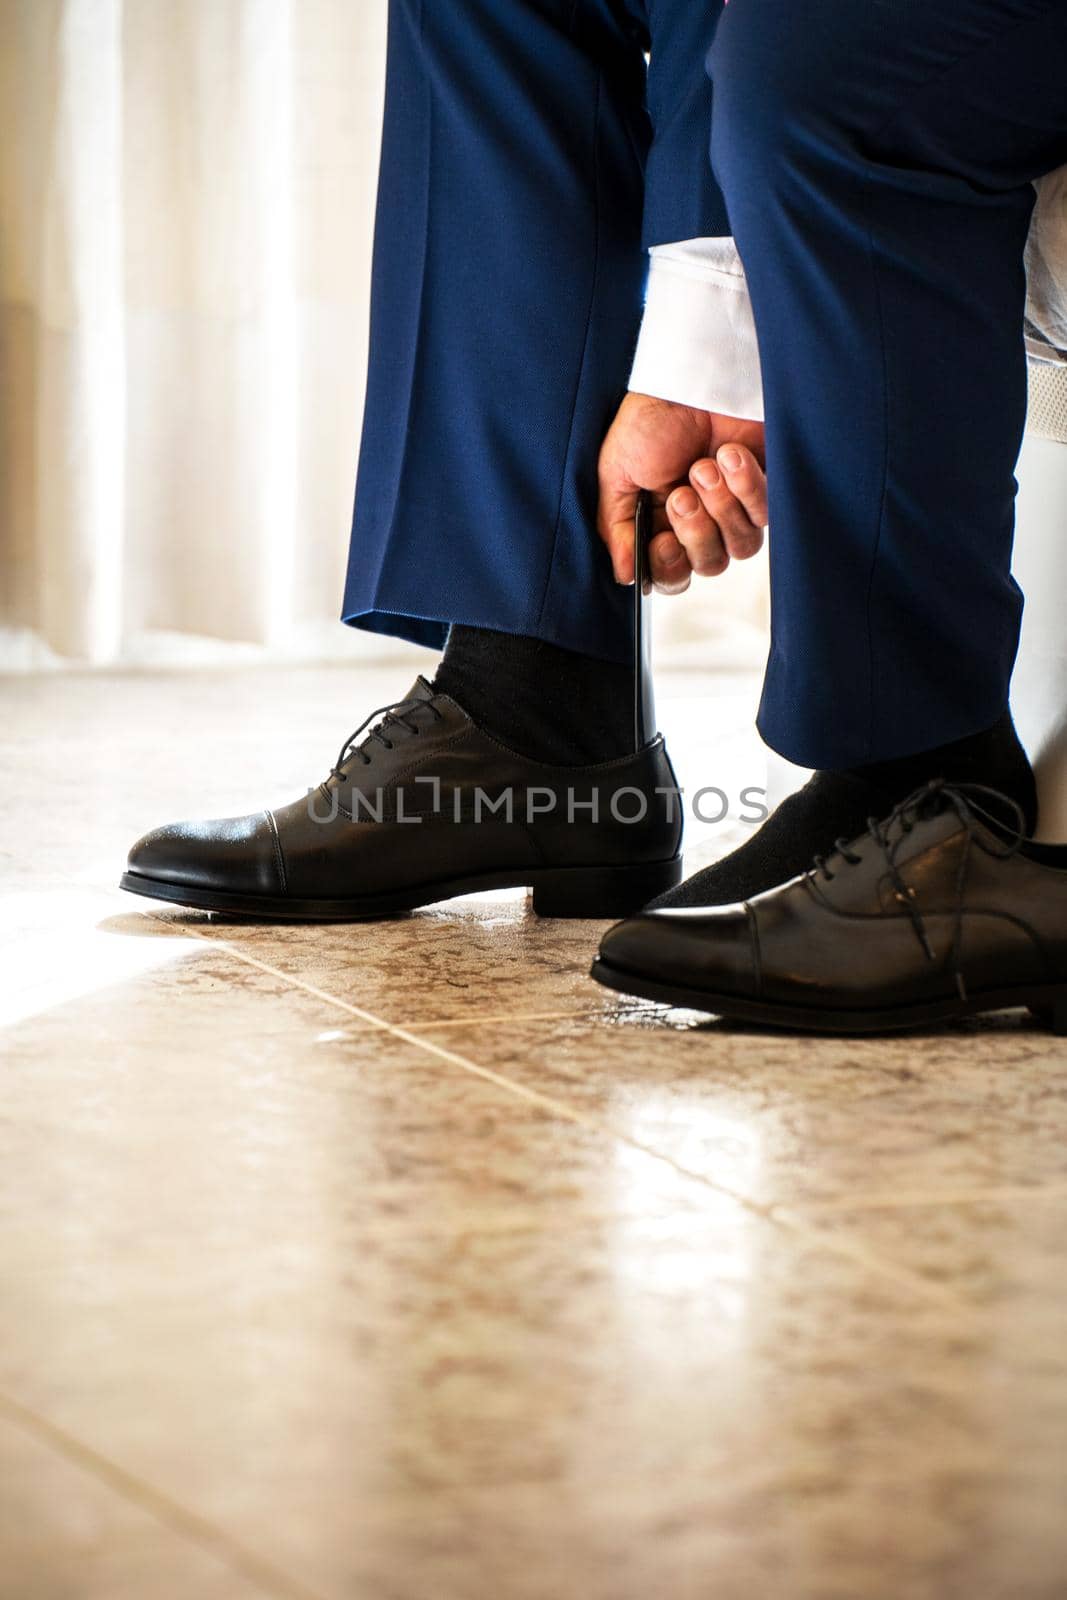 businessman clothes shoes, man getting ready for work,groom morning before wedding ceremony. High quality photo